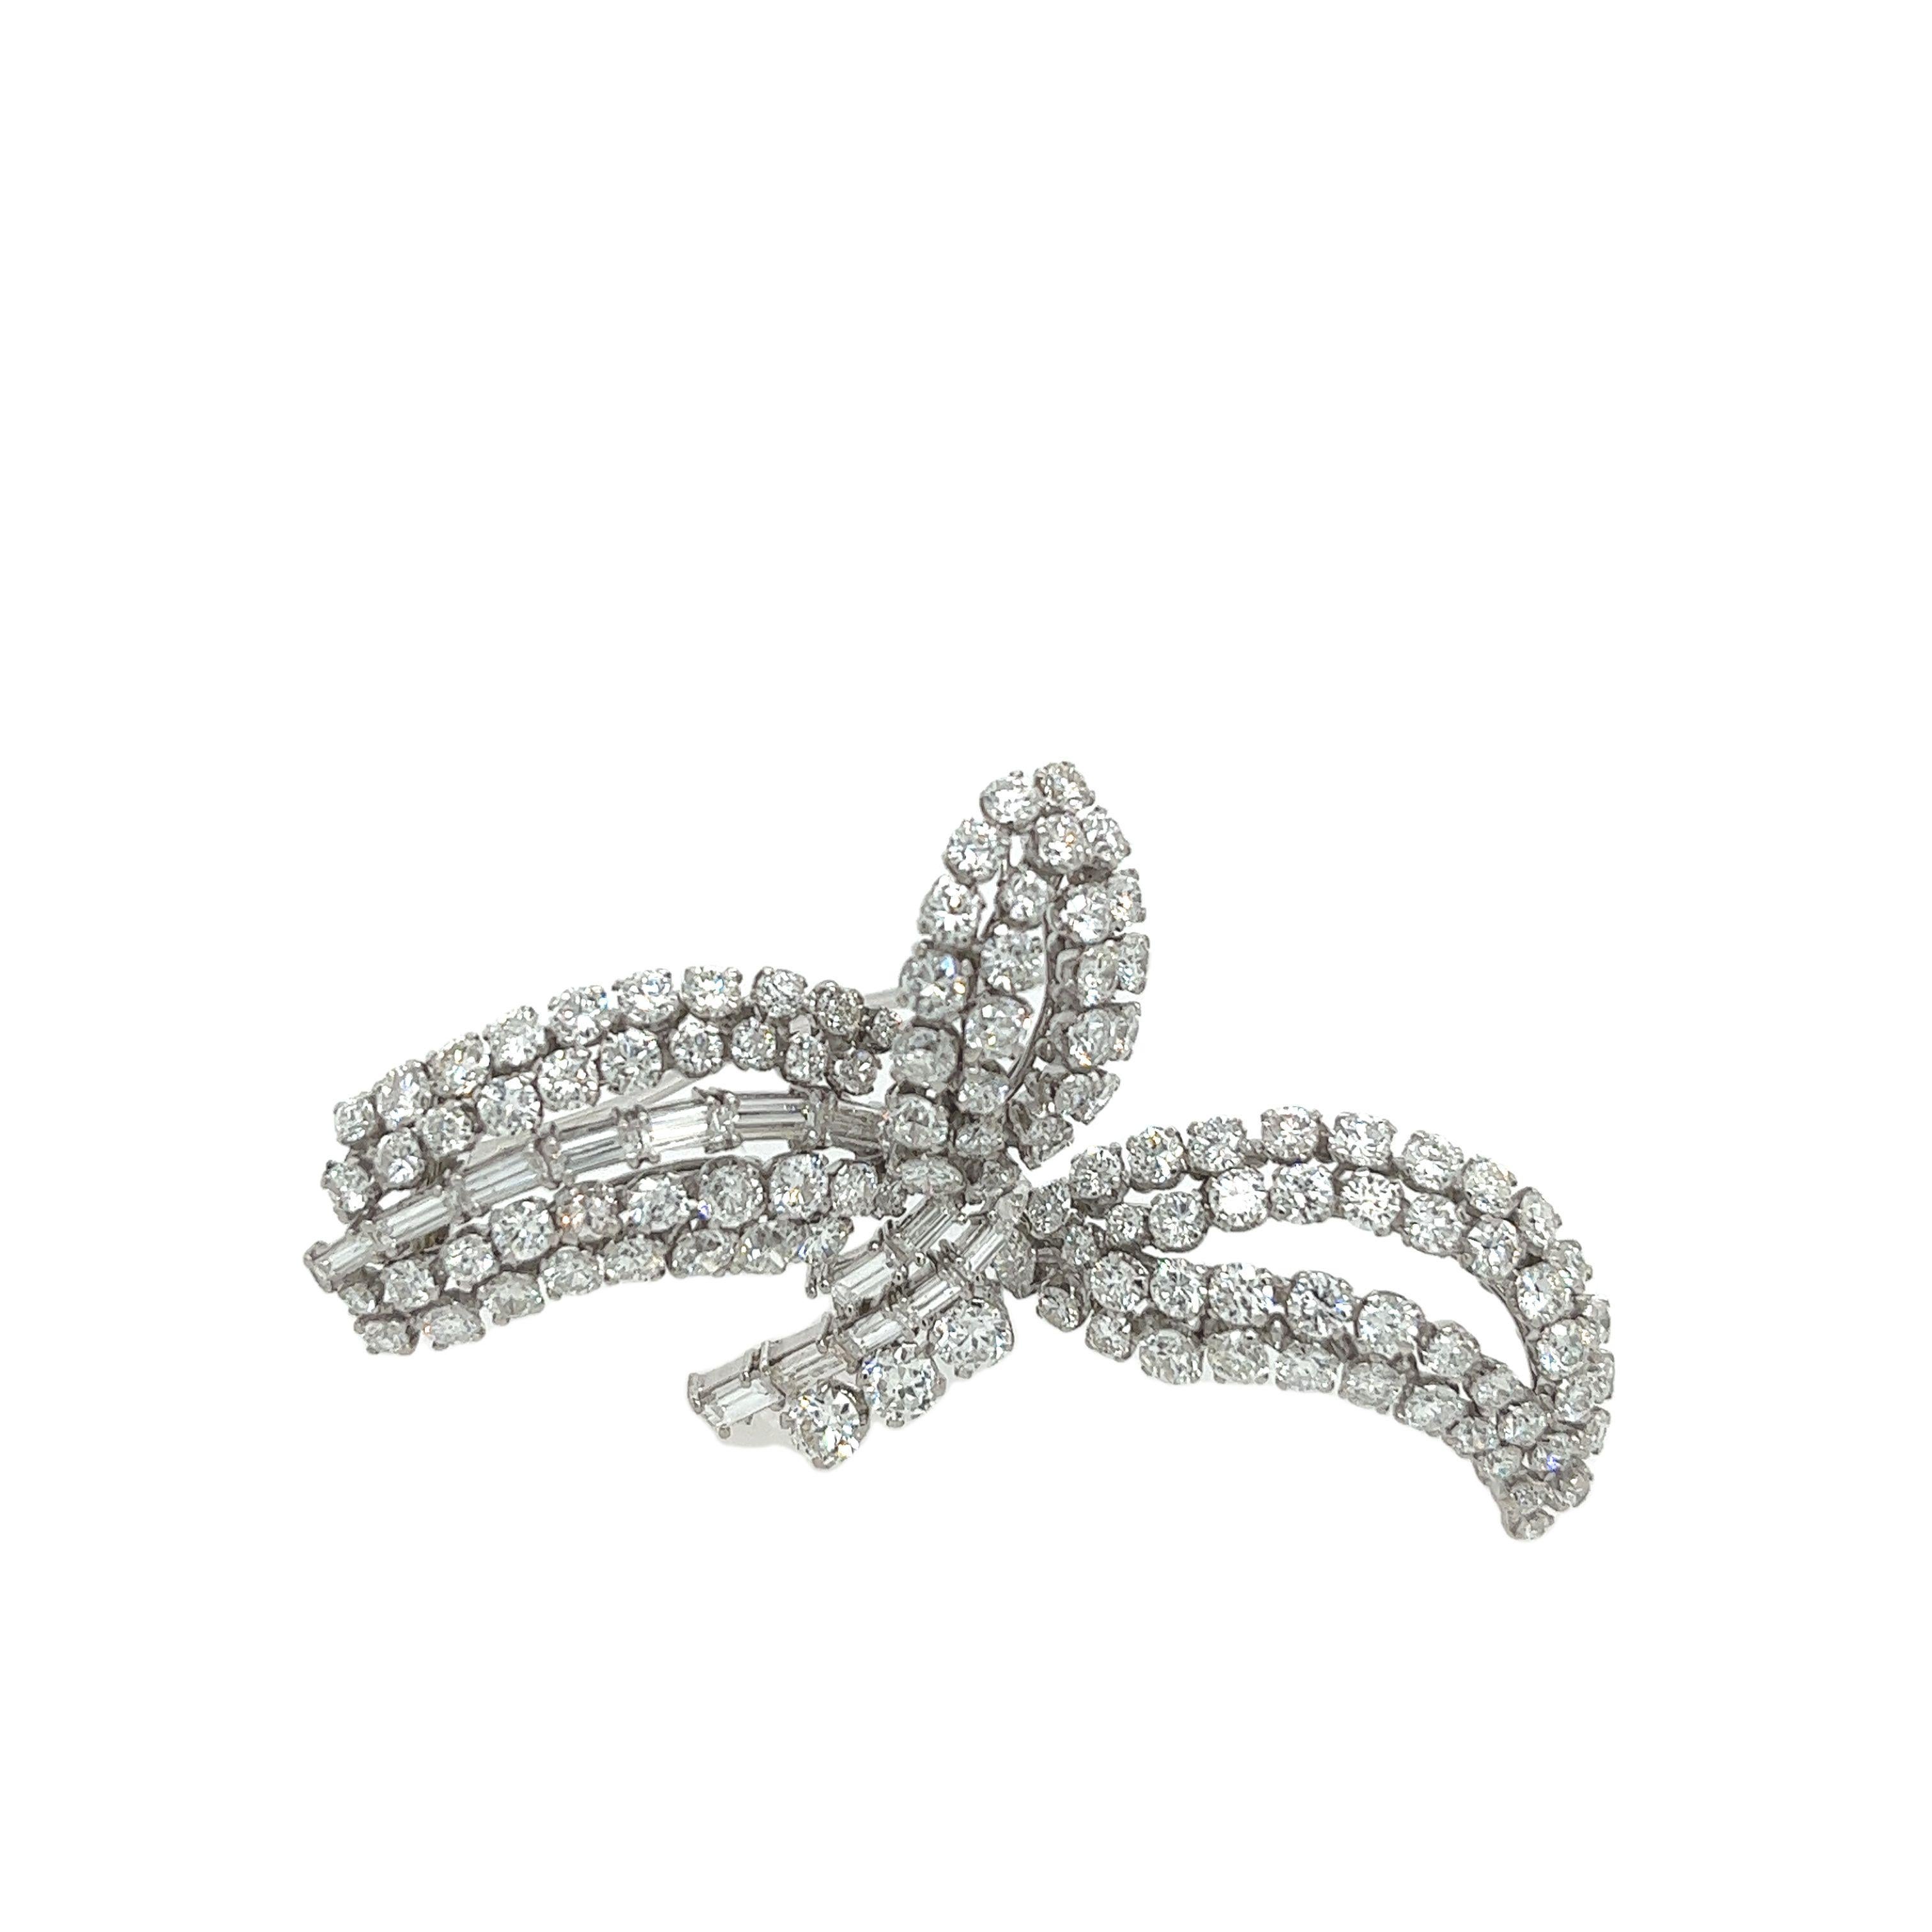 This stunning vintage brooch features 6.40ct of 
round brilliant cut and baguette diamonds, 
set in platinum & white gold setting. This stunning brooch is crafted with meticulous attention to detail, combining the brilliance of diamonds with the